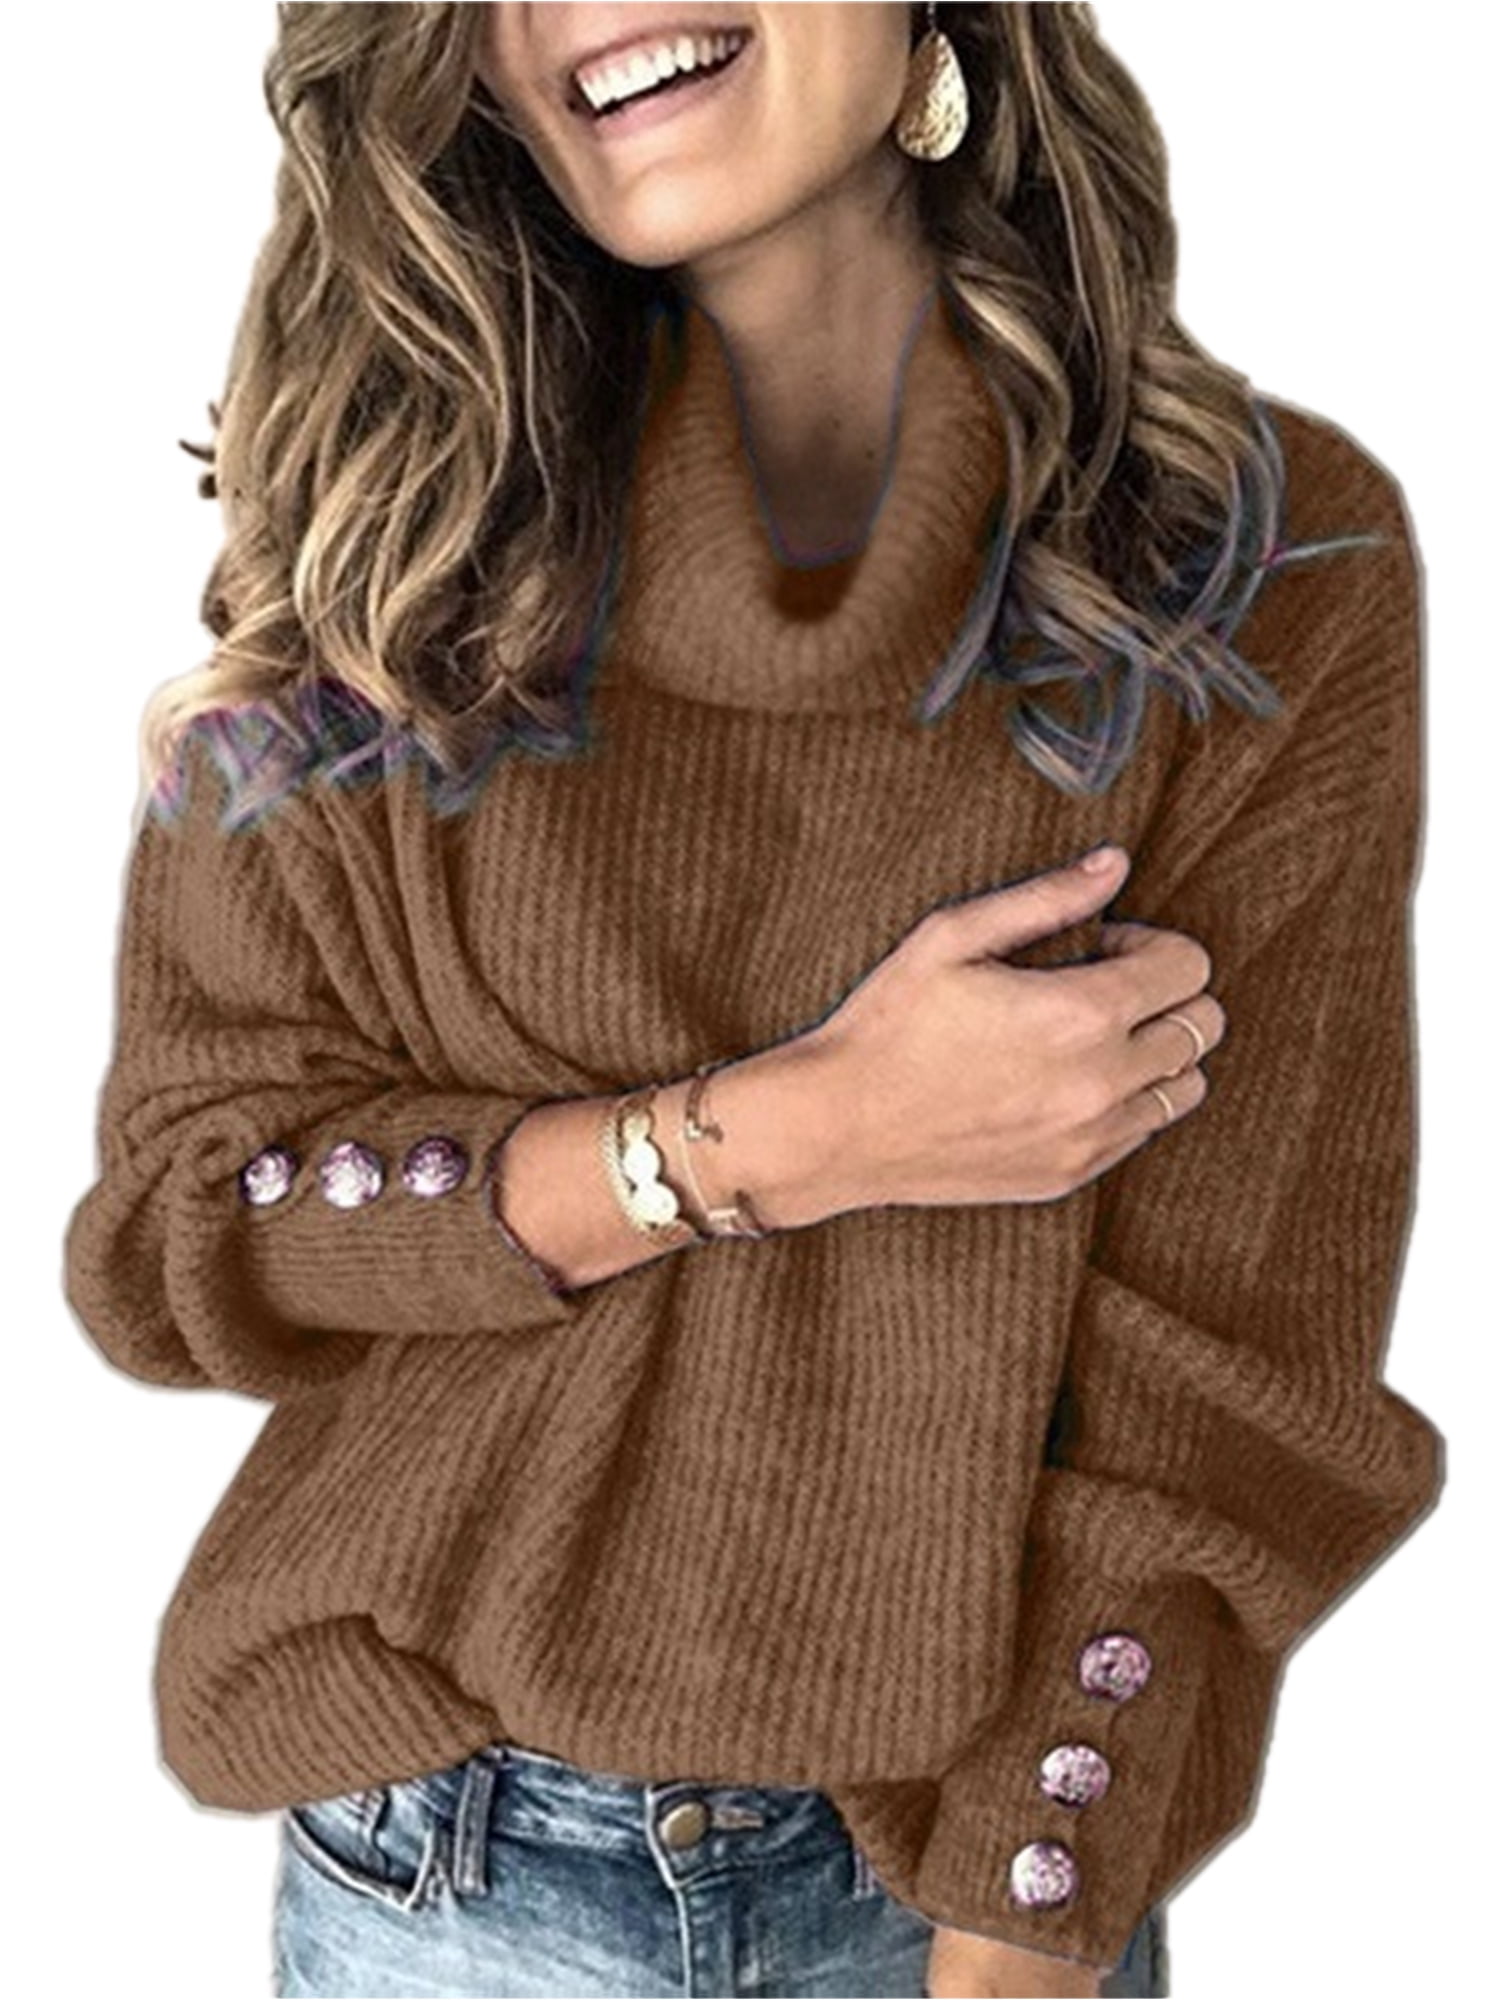 Womens Cowl Neck Loose Long Sleeve Knitted Sweater Jumper Pullover Shirt Top New 